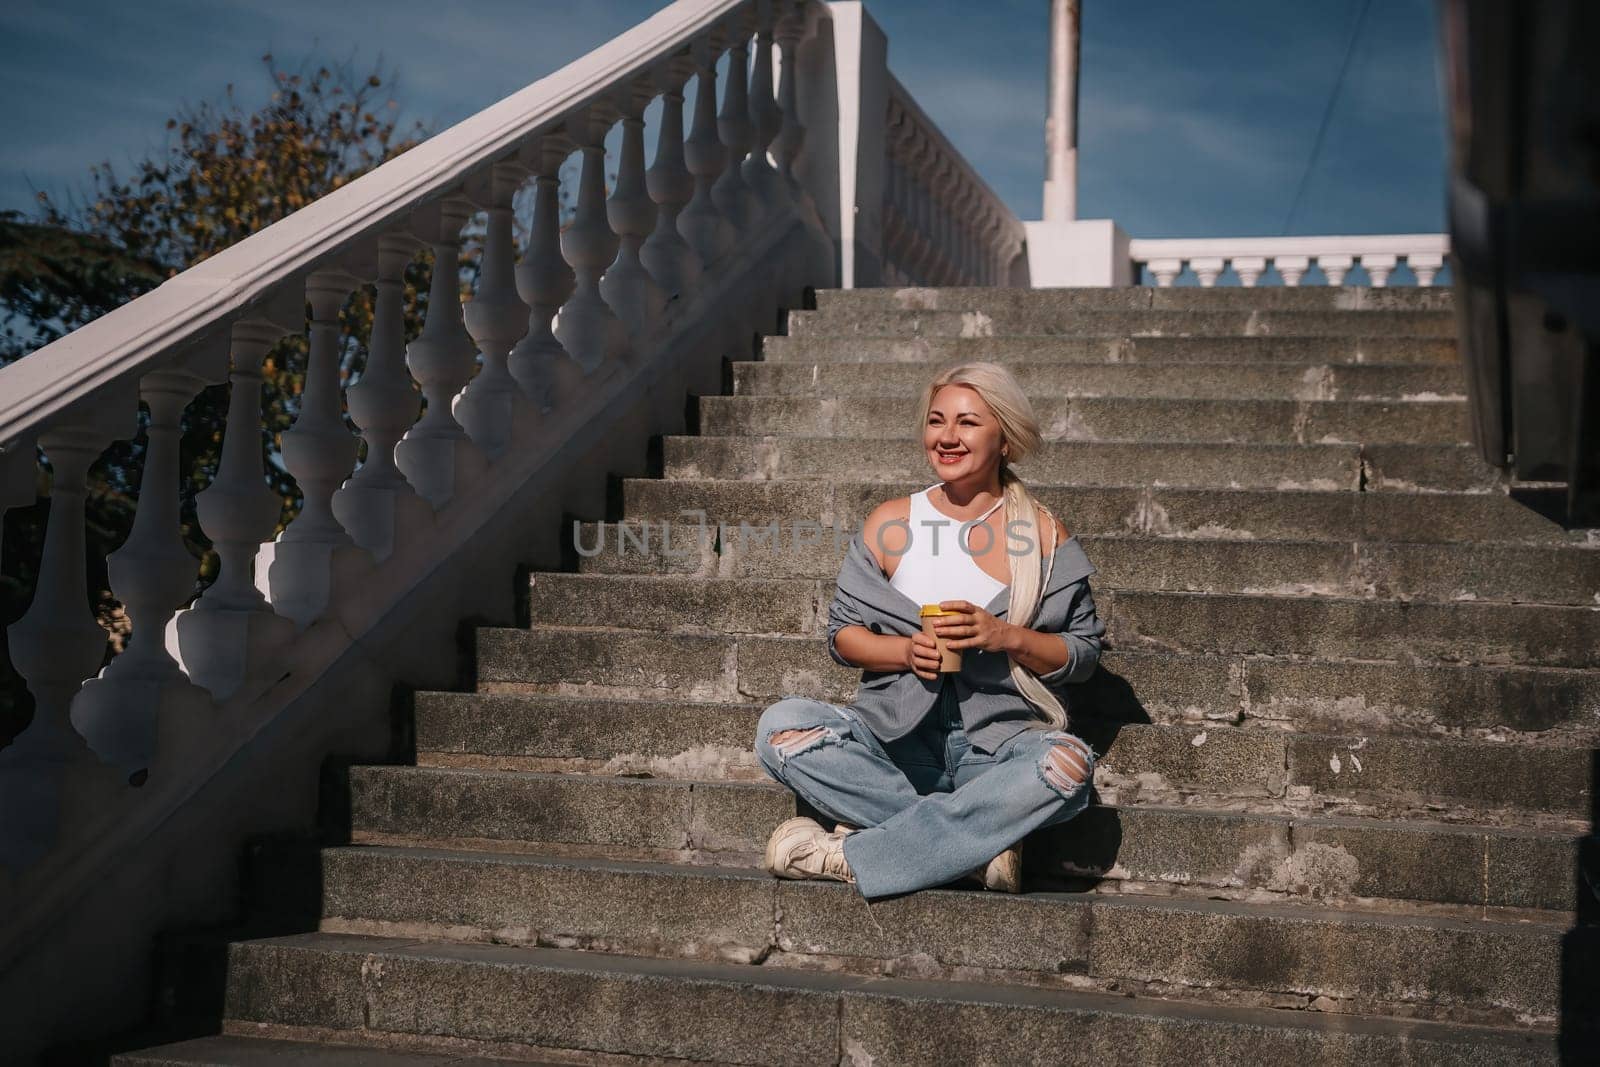 A woman sits on a set of stairs, holding a cup of coffee. She is enjoying her coffee and taking in the view from the top of the stairs